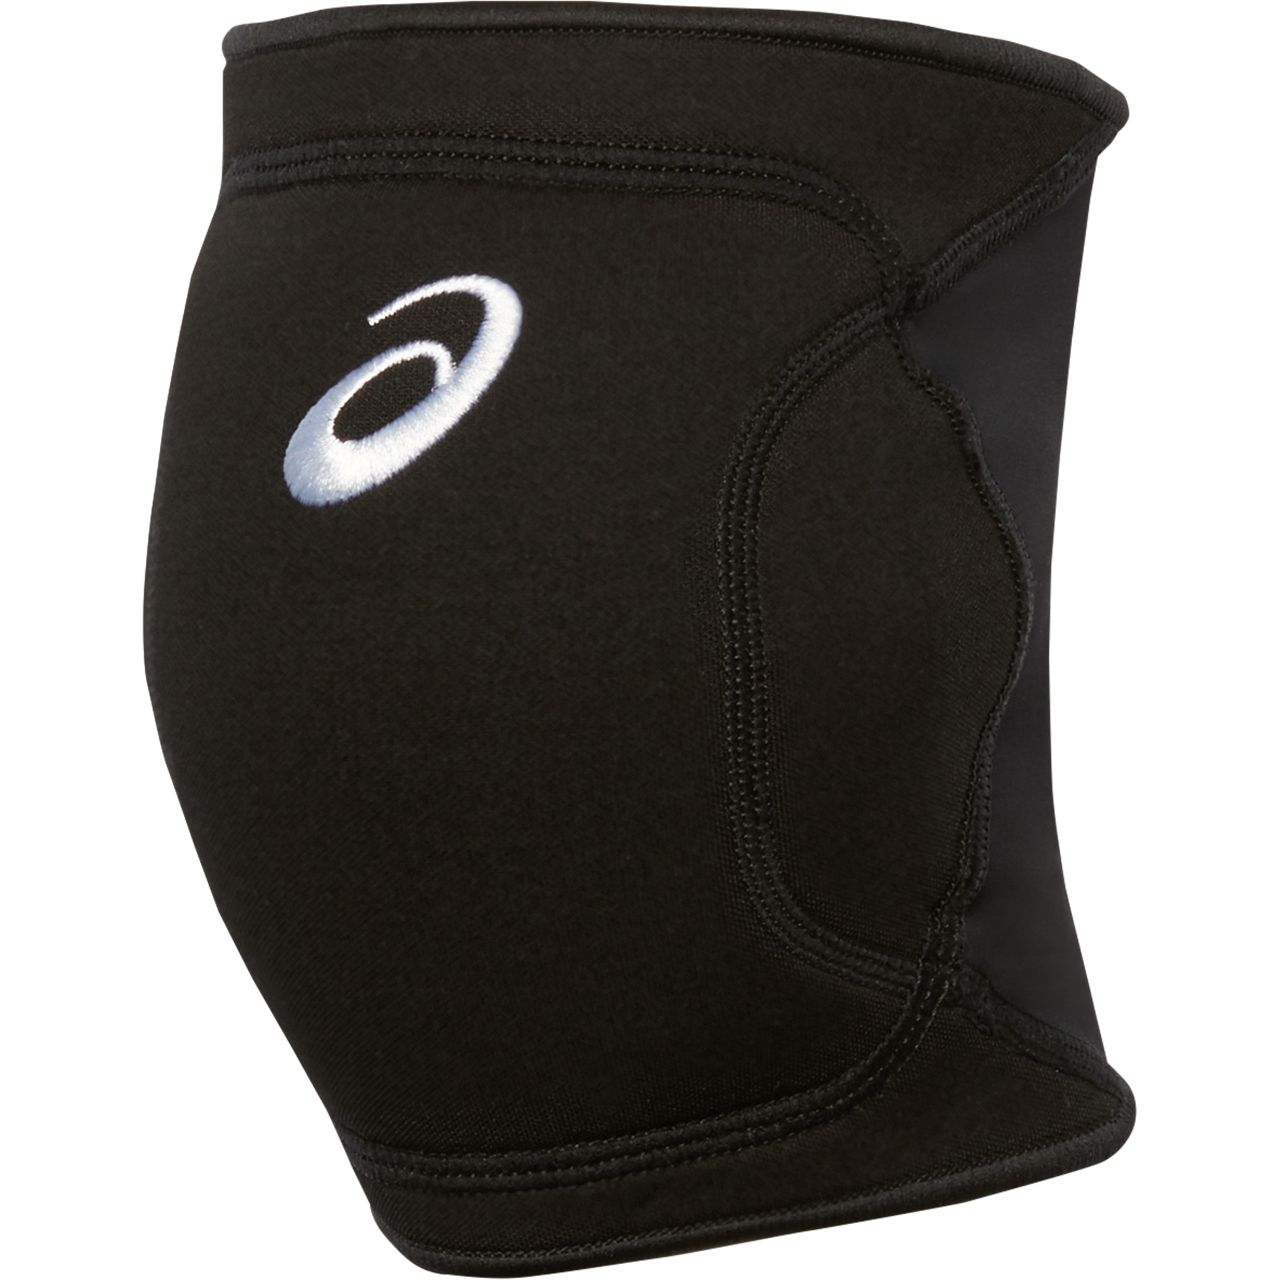 ace volleyball knee pads